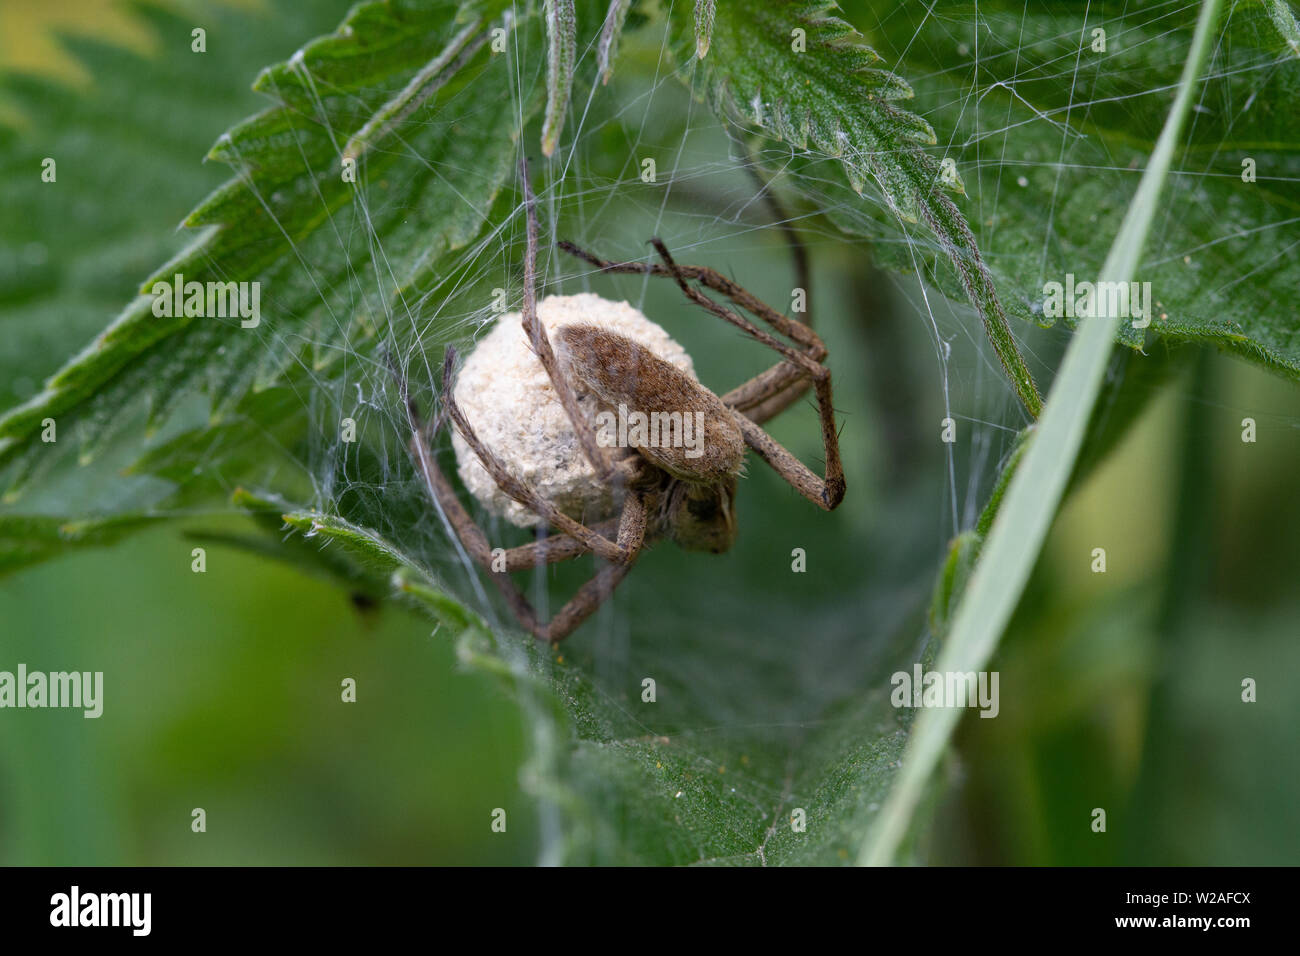 UK wildlife: Female nursery web spider protecting an egg sac from inside a web Stock Photo